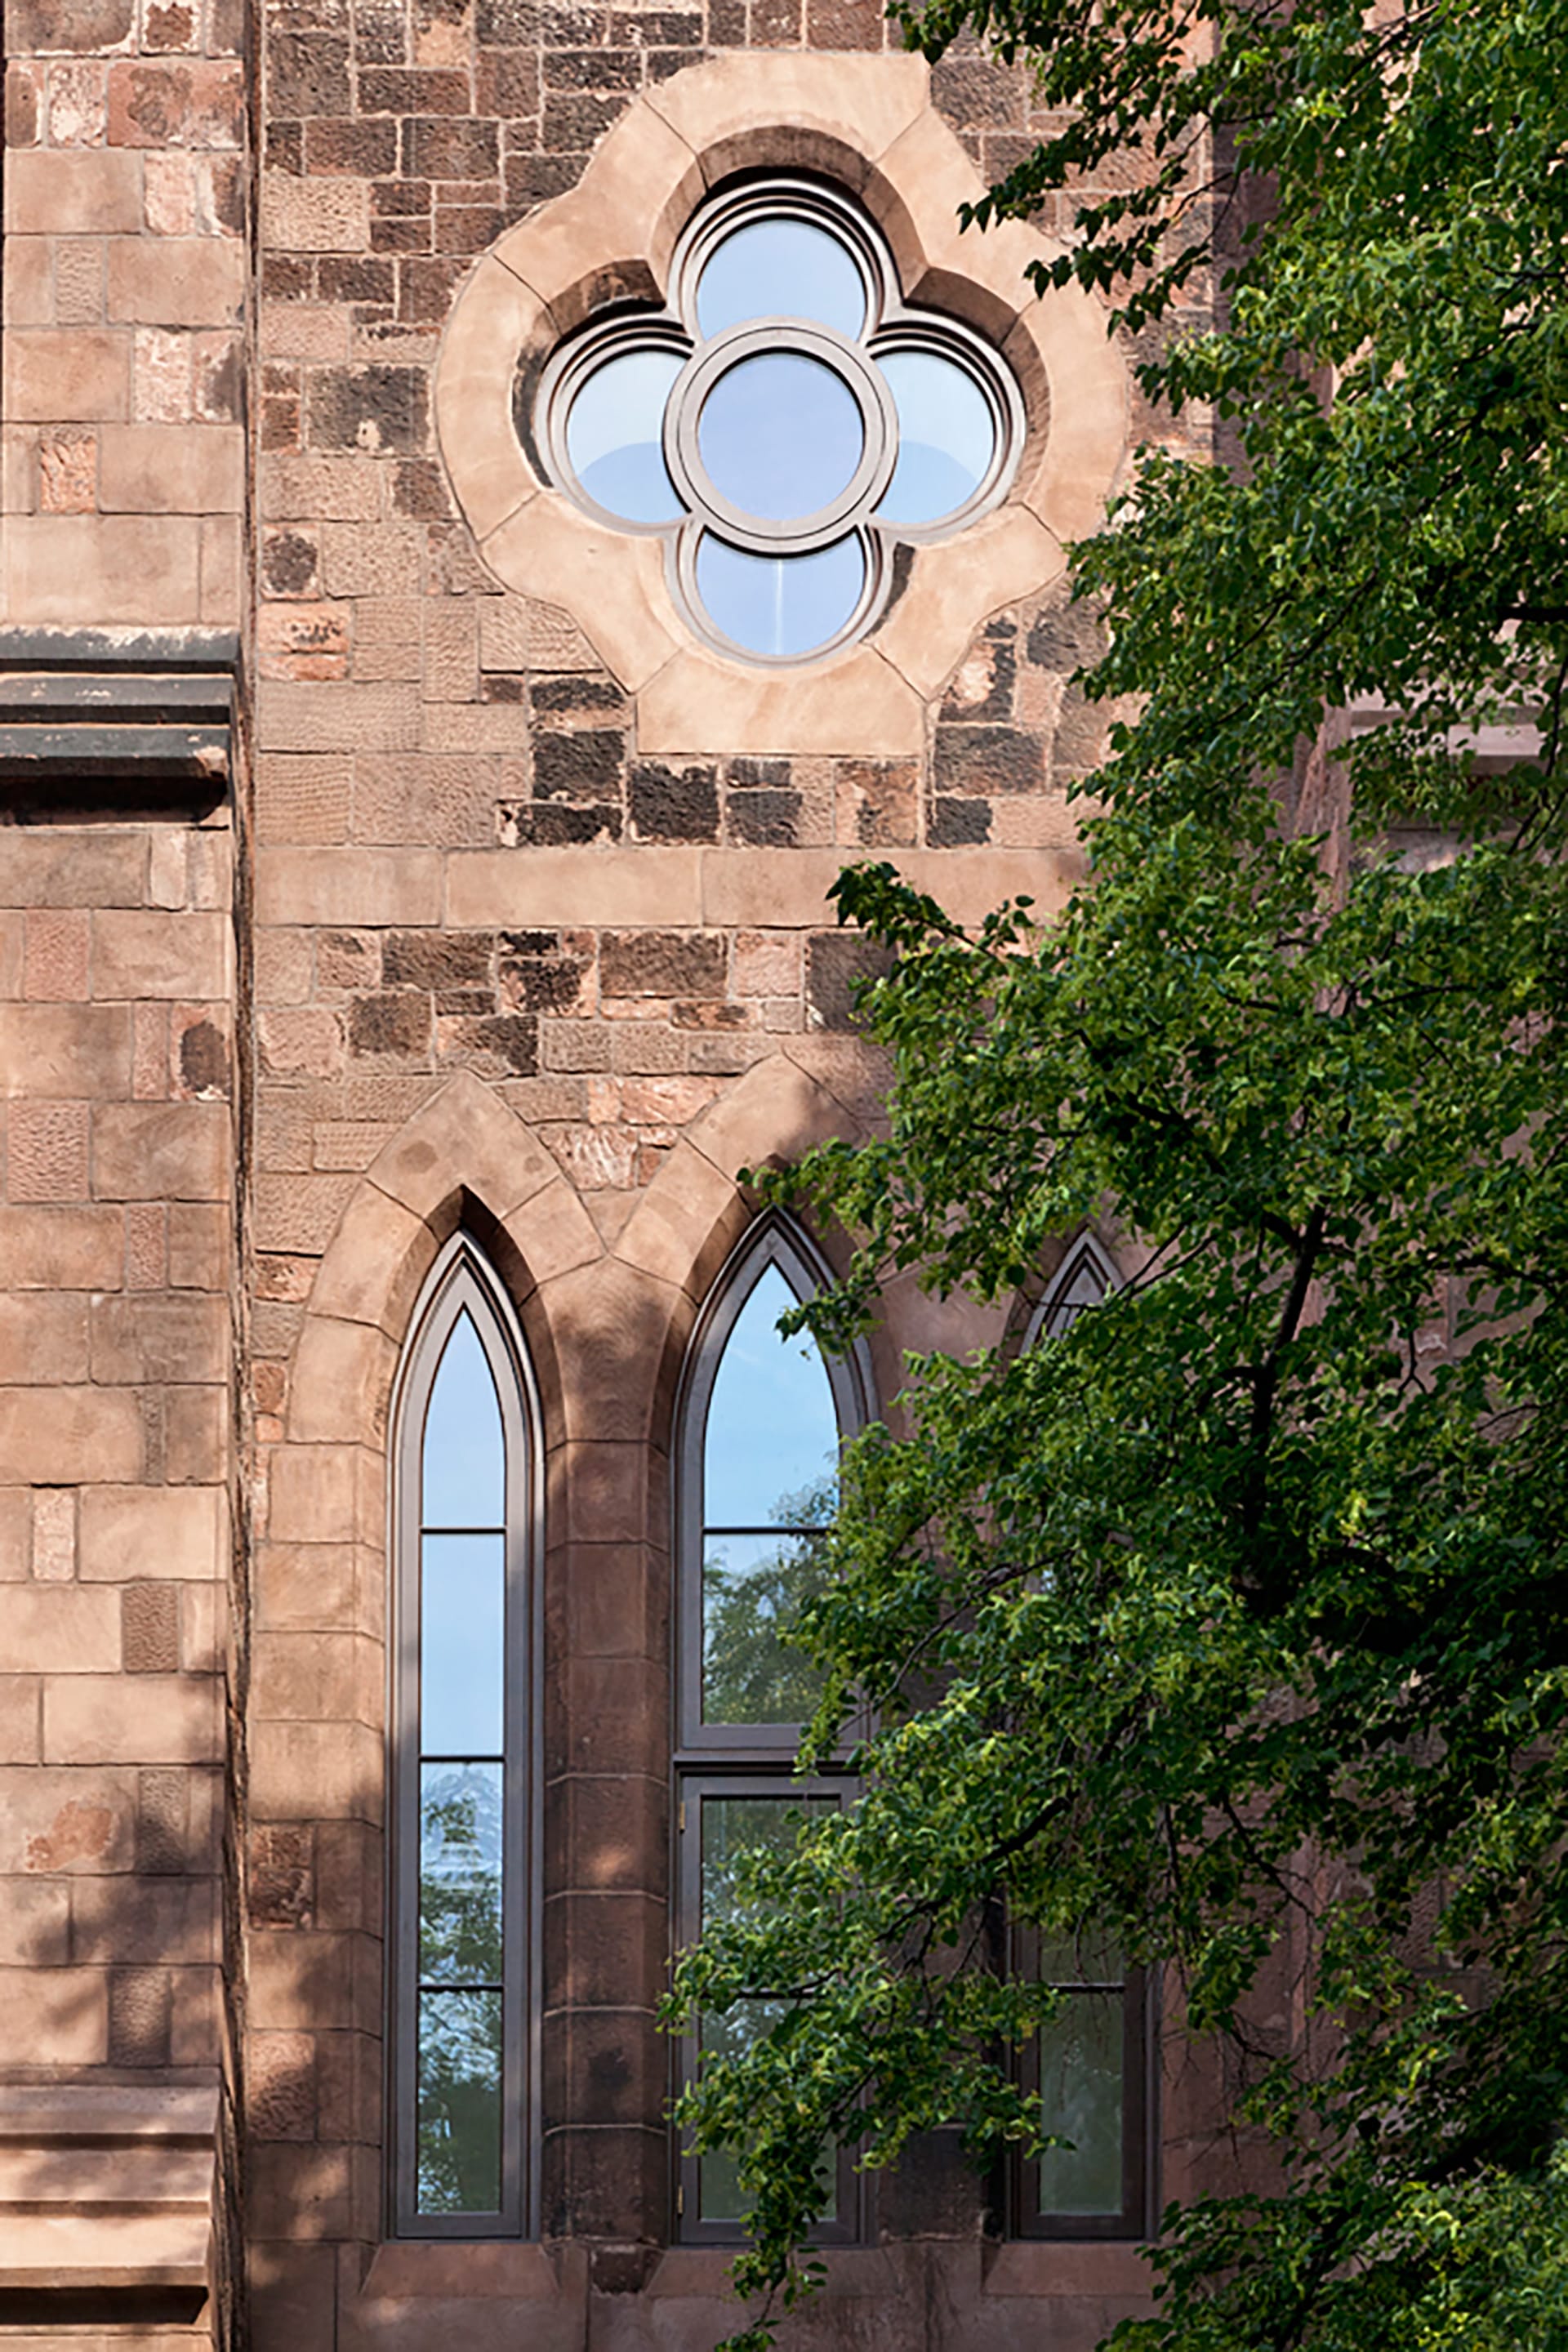 Brownstone details and a flower-shaped window on the exterior of a church converted into condos